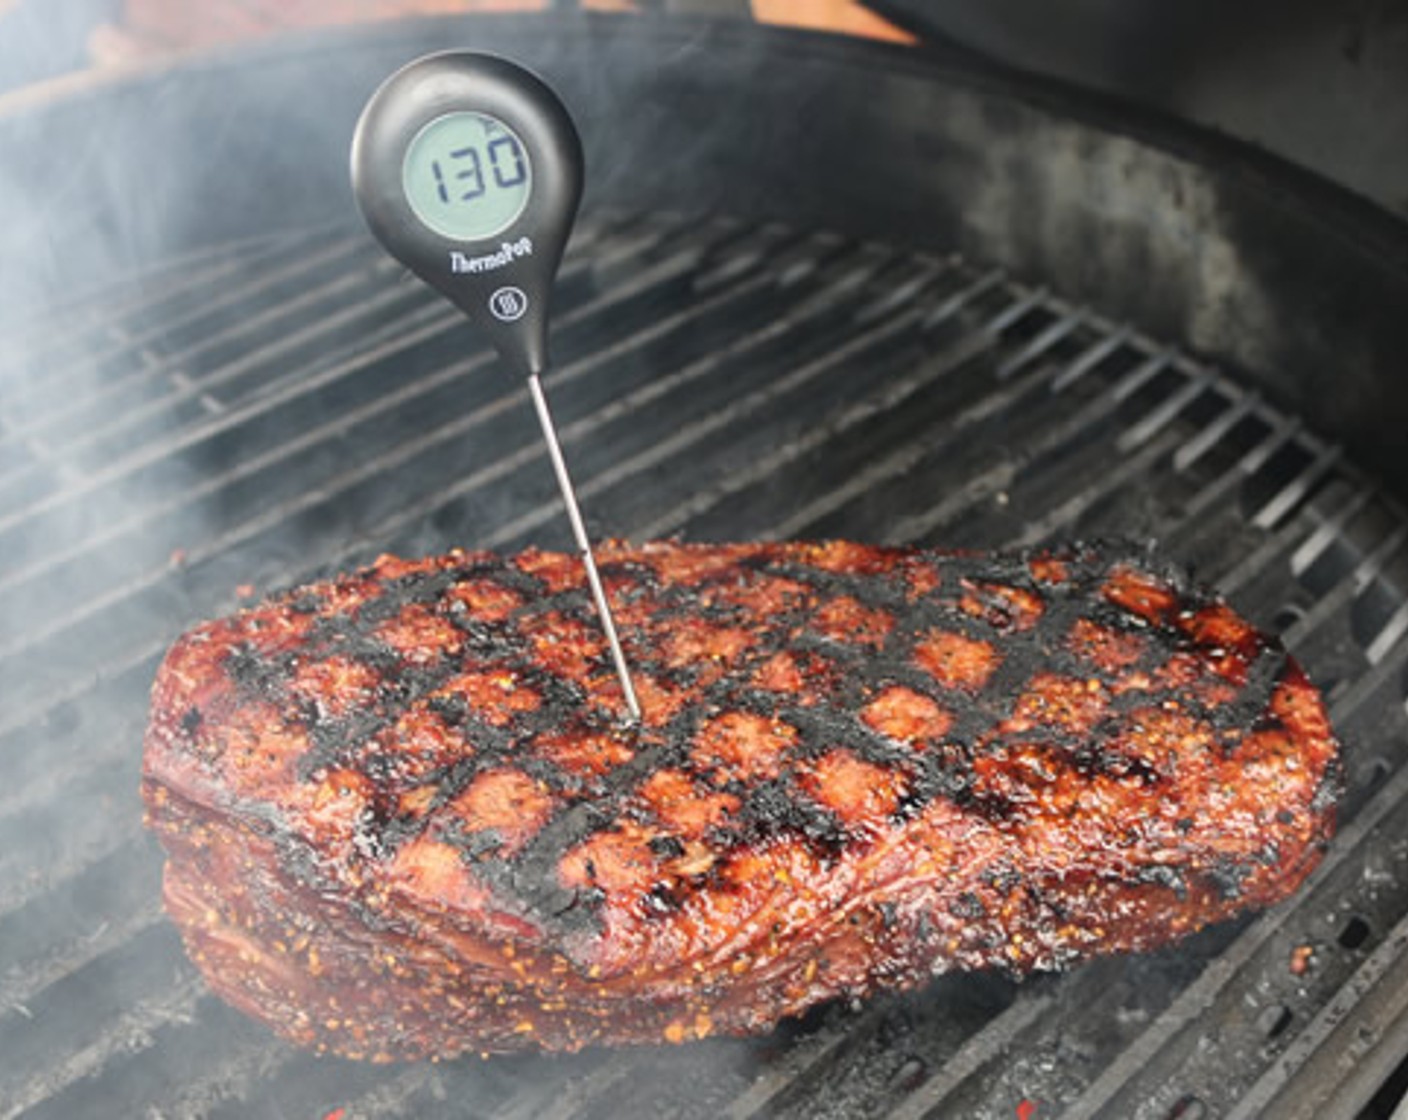 step 10 After another 3 minutes rotate the London Broil 45 degrees and check the internal temperature.